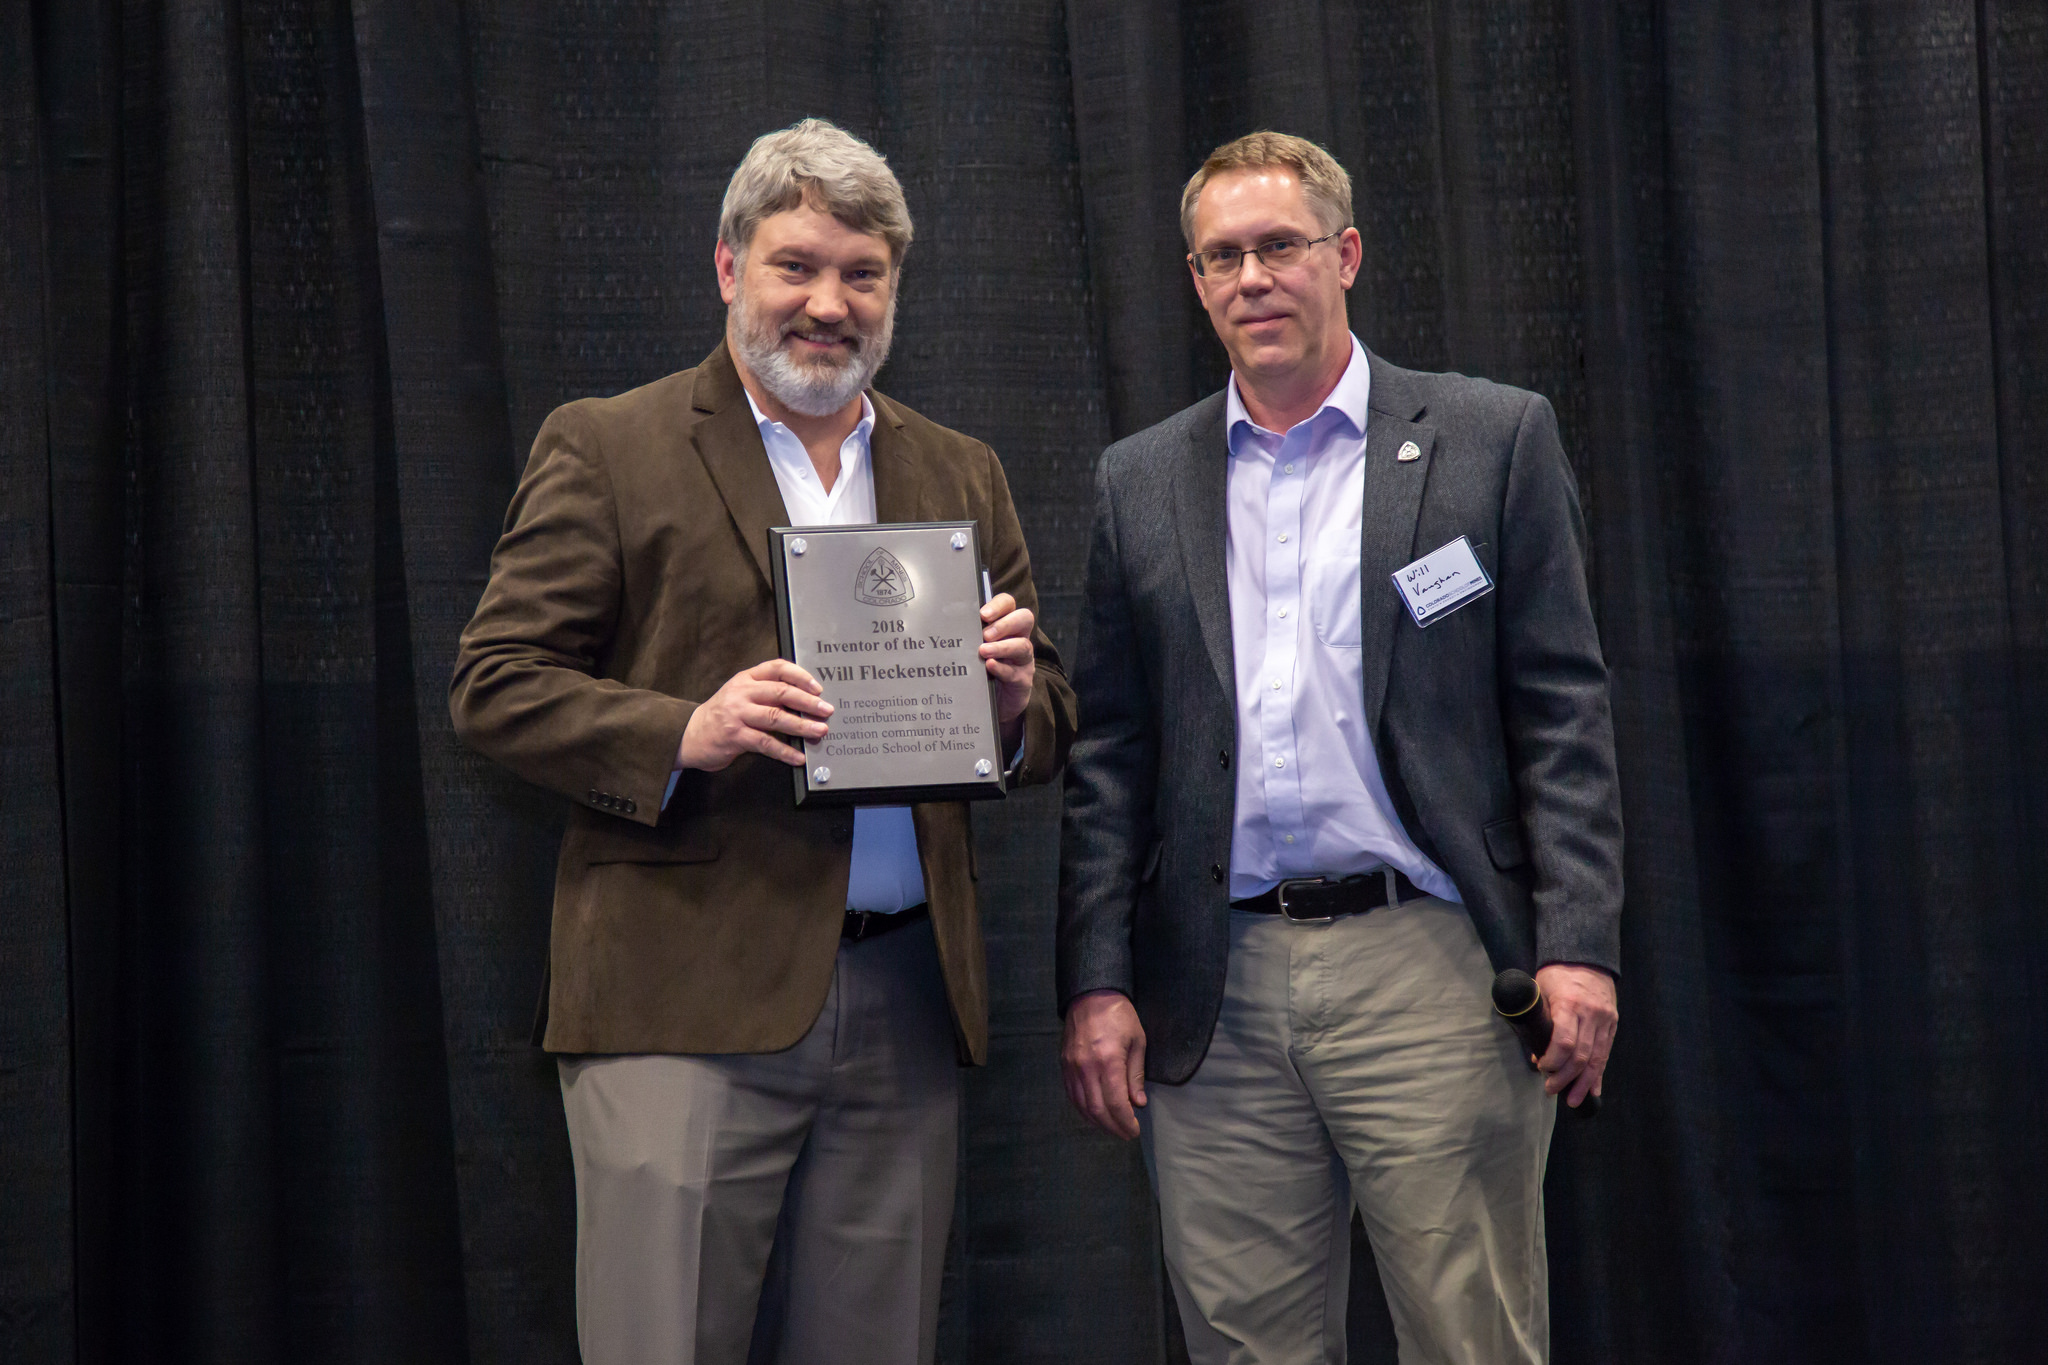 Wiliam Fleckenstein with his 2018 Mines Inventor of the Year award